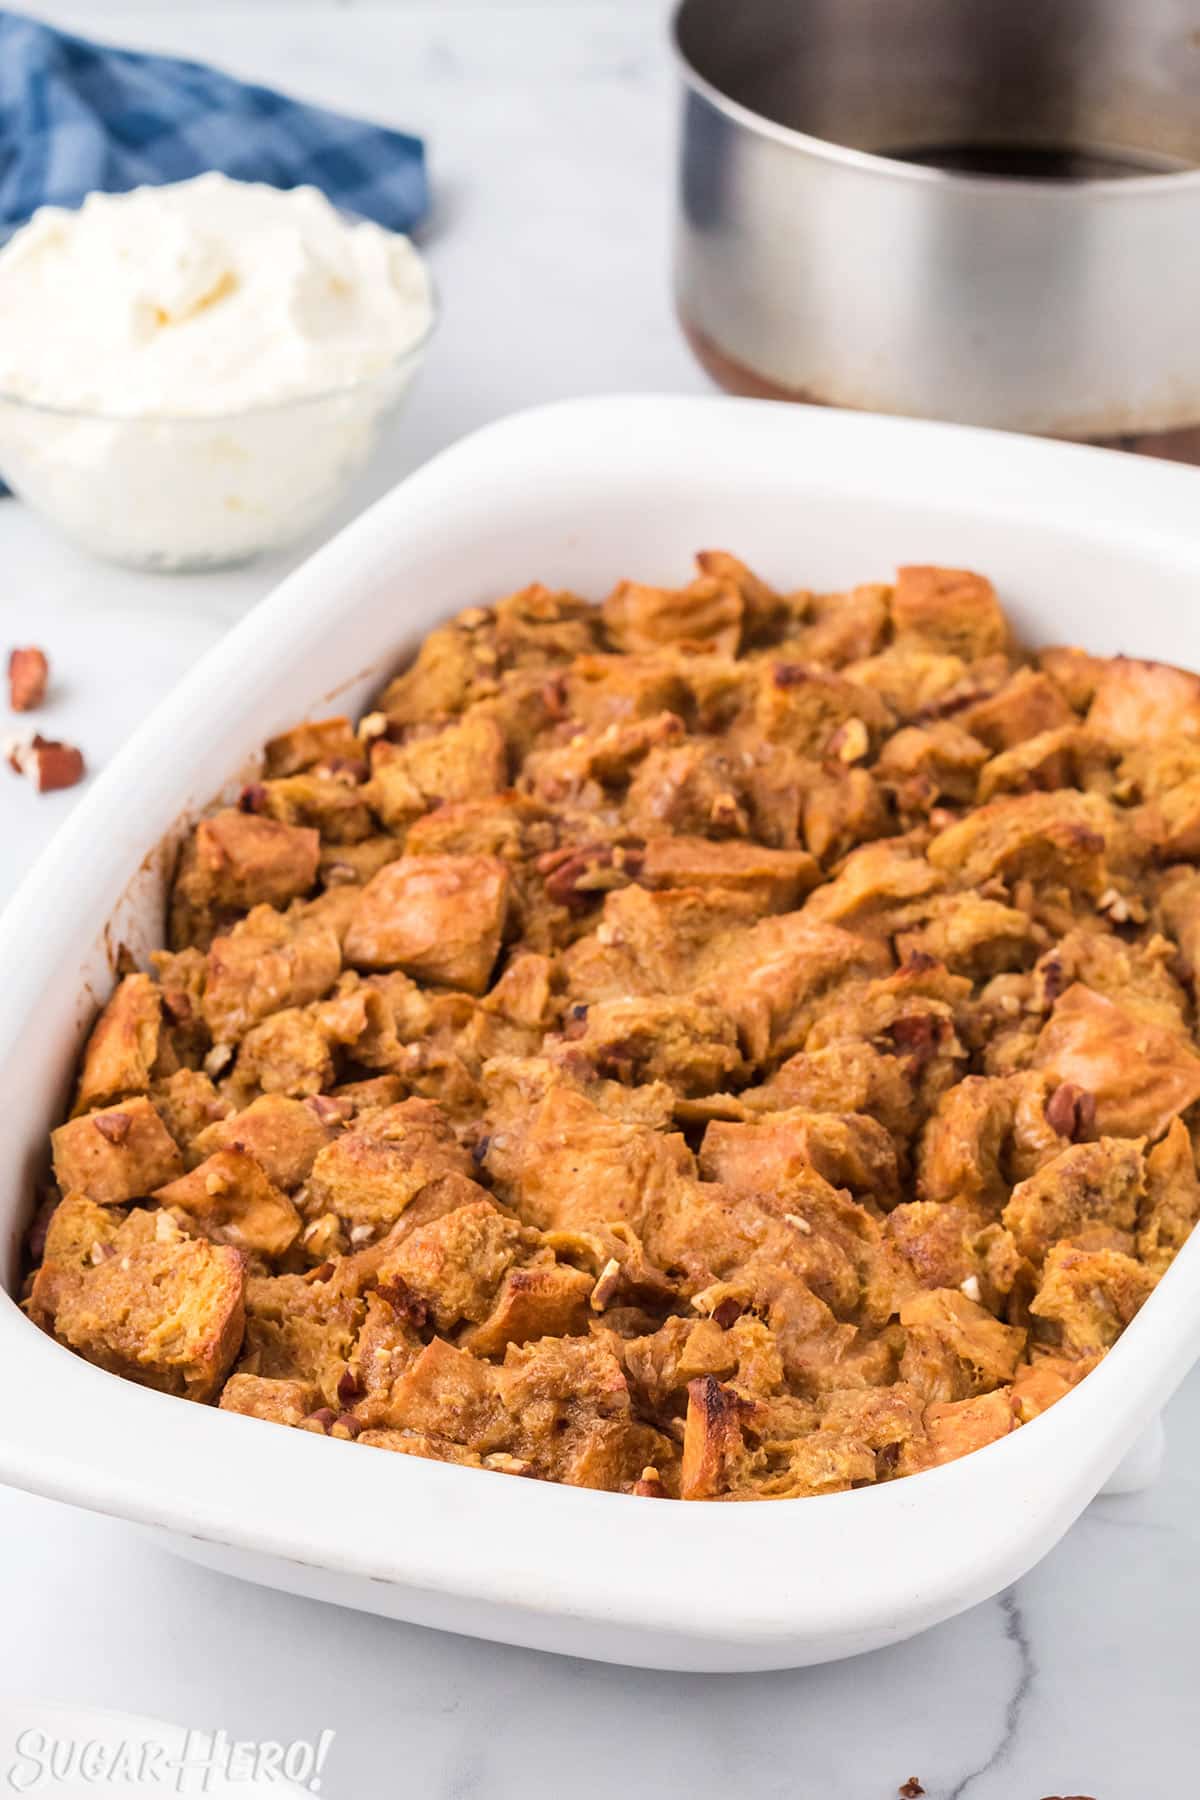 Pumpkin Bread Pudding baked in a large casserole dish, on a white marble surface.